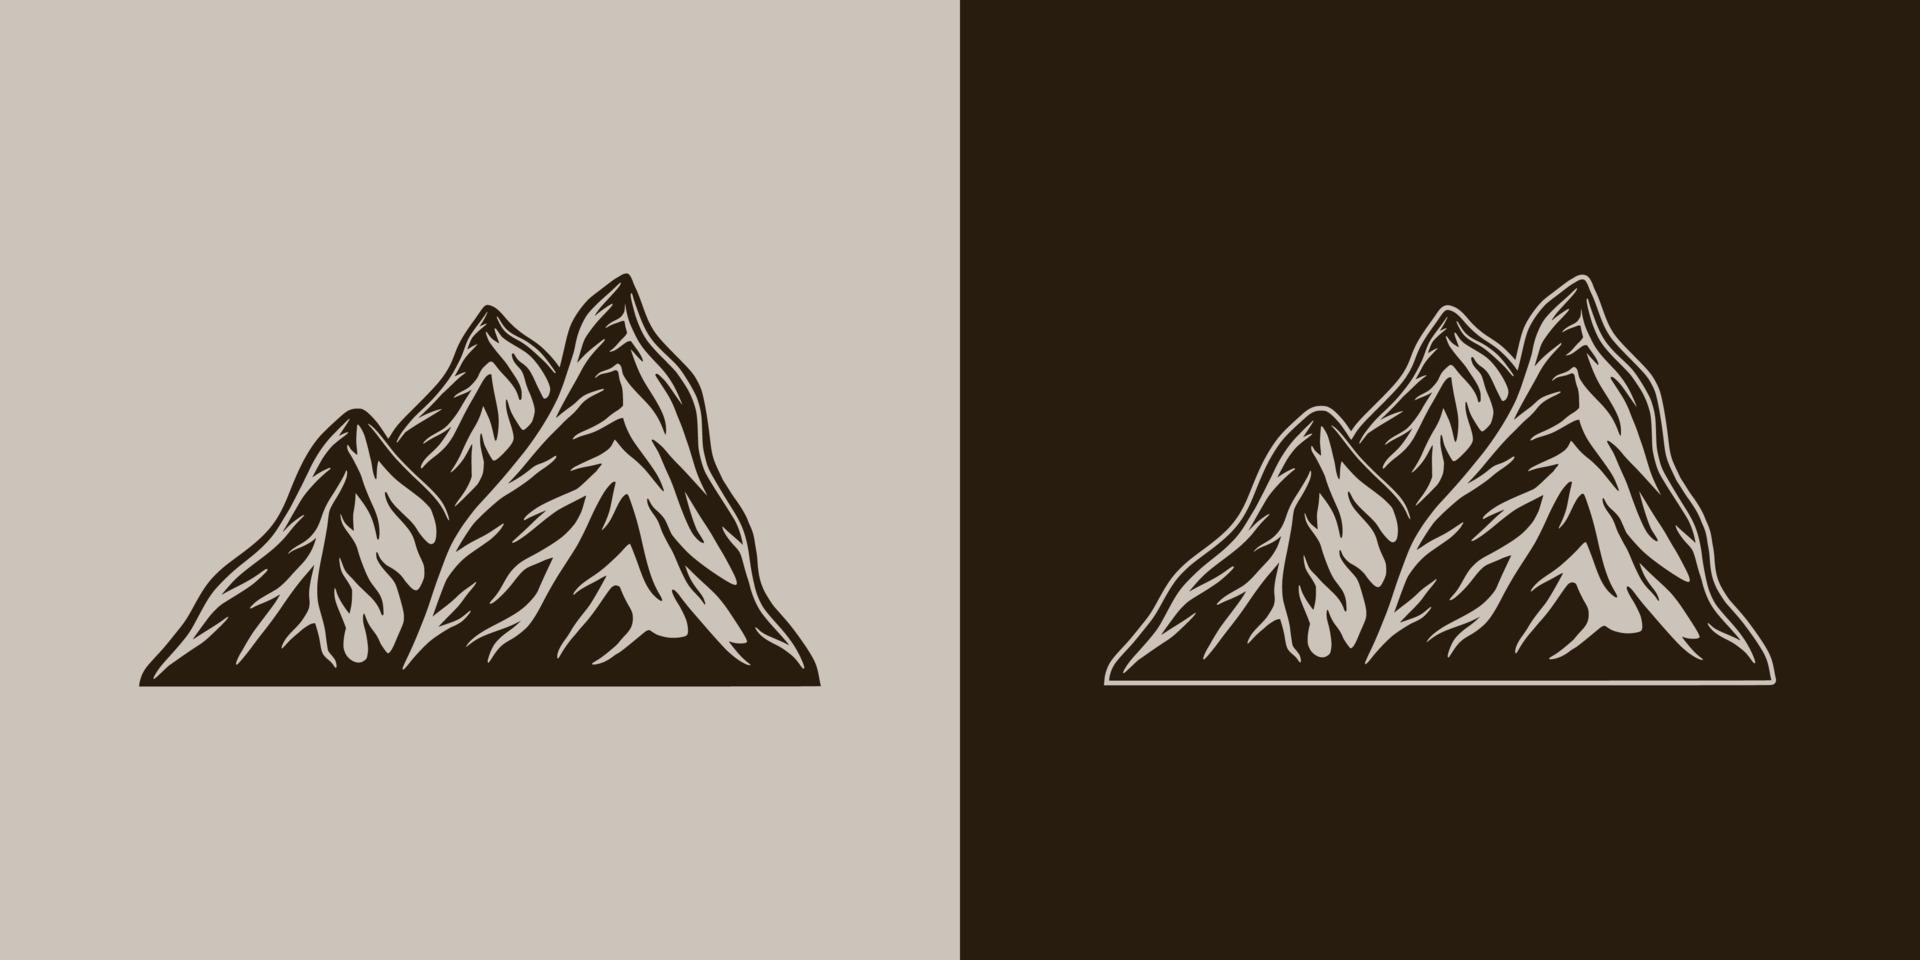 Vintage retro camping adventure travel outdoor element. Mountain rock. Can be used for emblem, logo, badge, label. mark, poster or print. Monochrome Graphic Art. Vector Illustration.